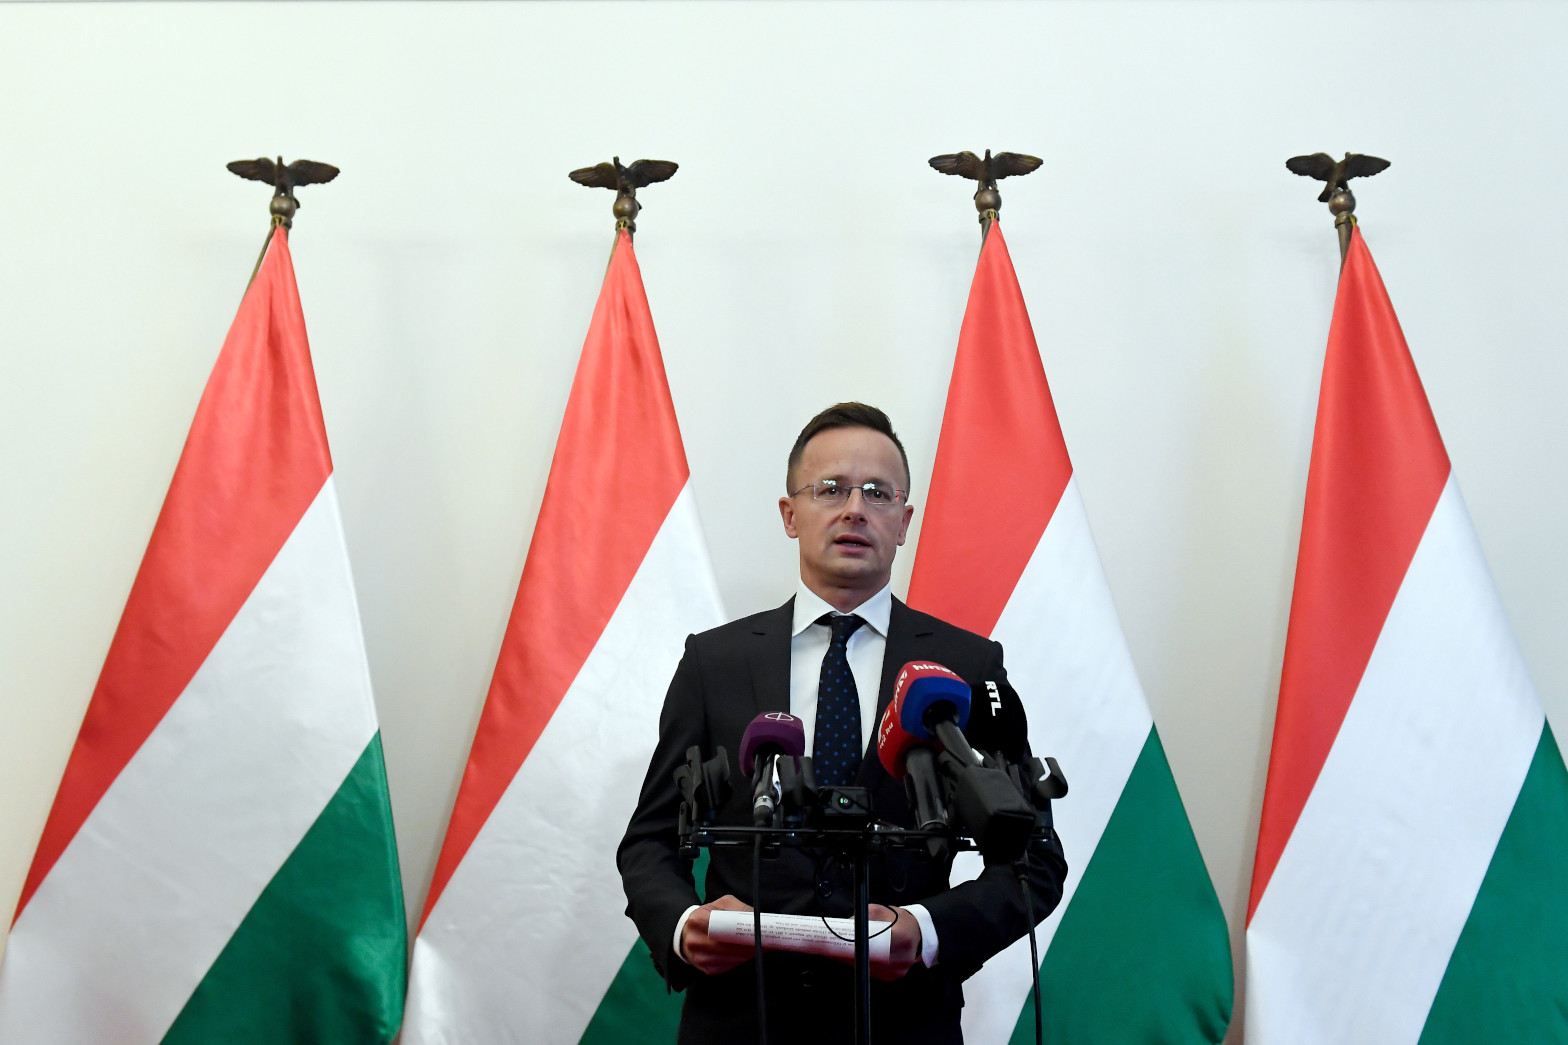 Hungary’s Foreign Minister: Boris Johnson ‘Knows What He Is Doing’